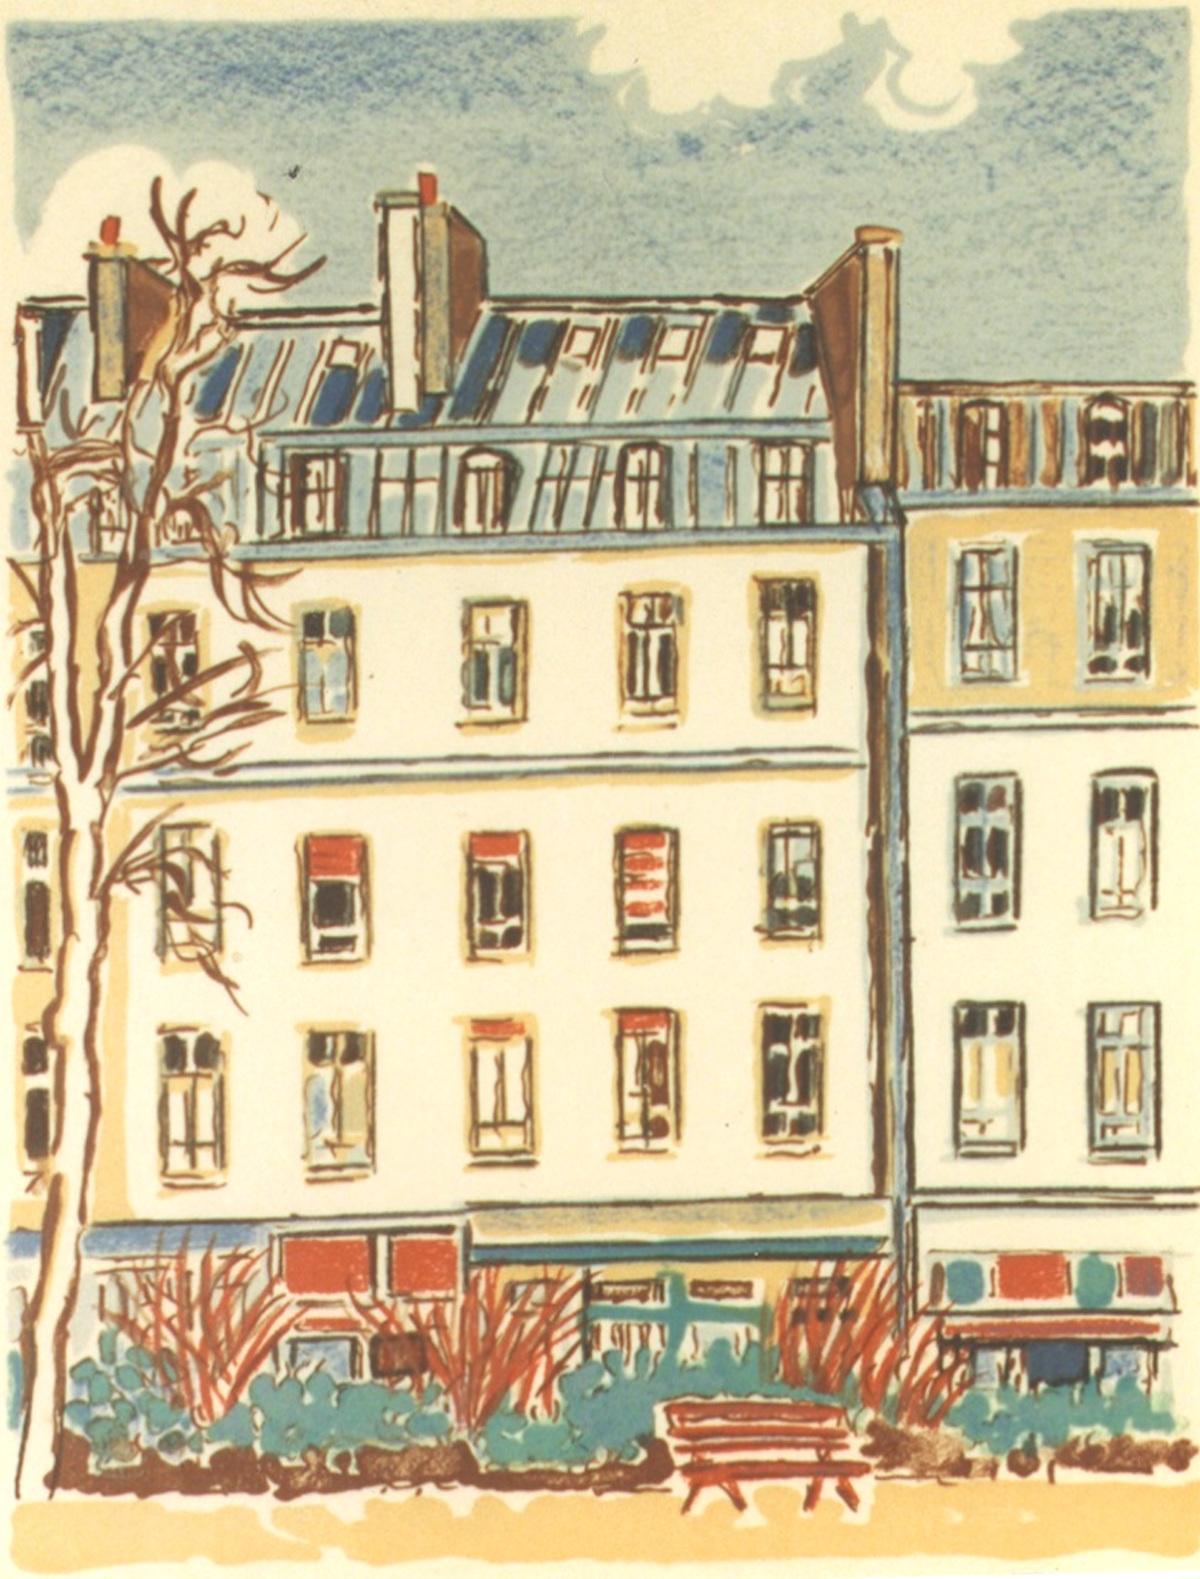 Paris, Houses and Tree - Lithograph by Orfeo Tamburi - 1980s